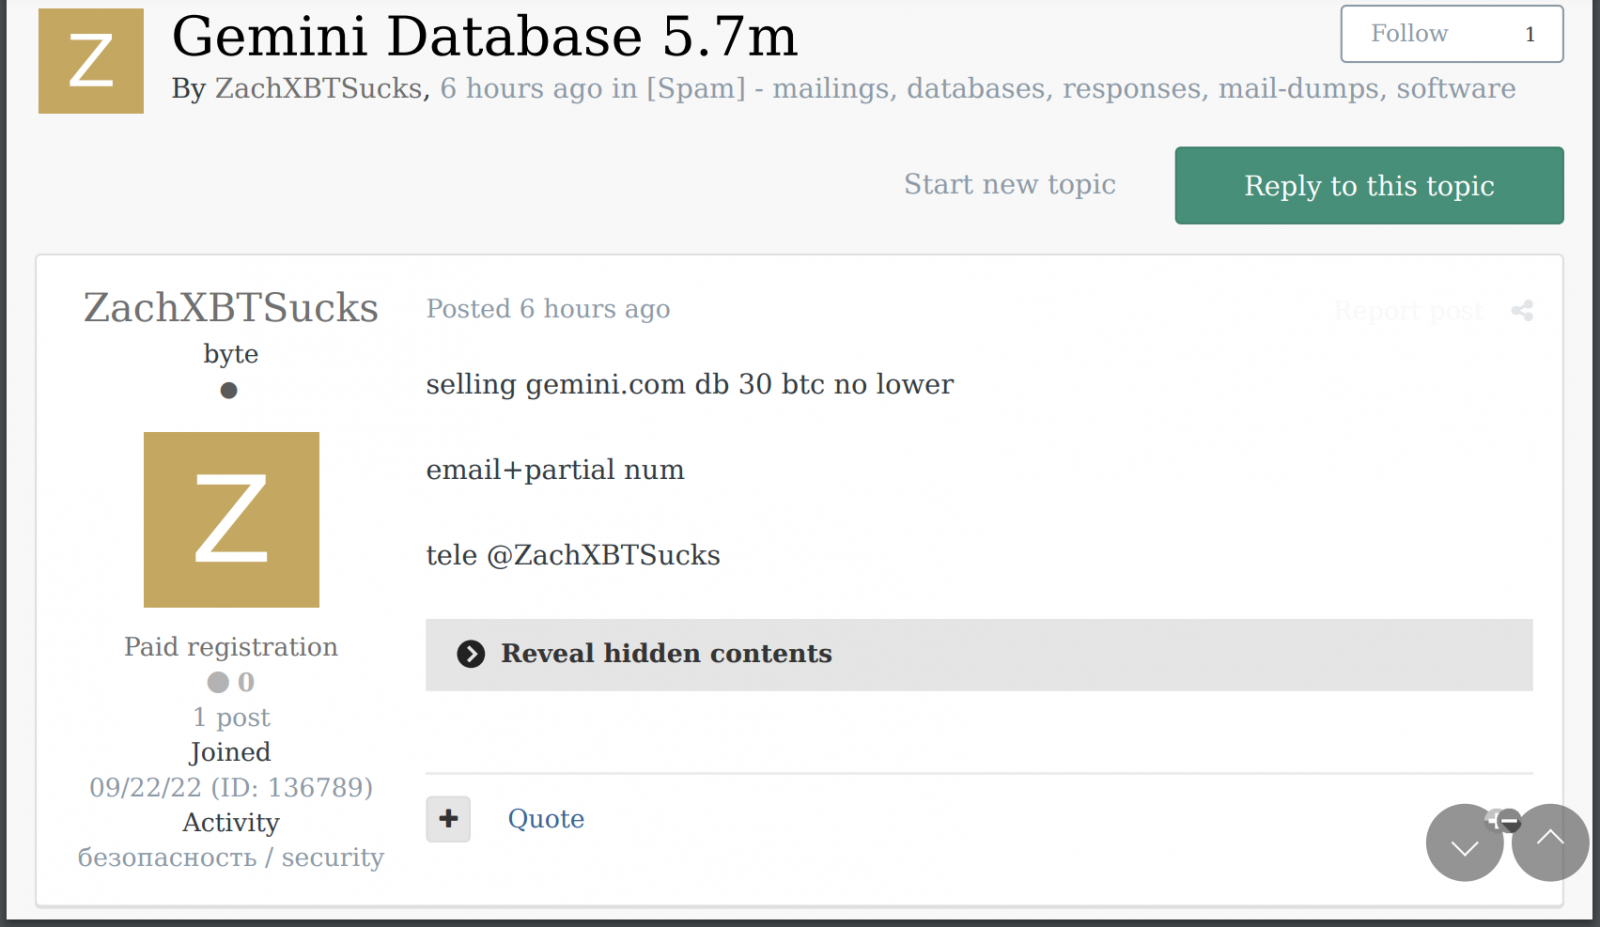 Hacker forum post asking 30 bitcoins for Gemini database with 5.7 million emails.